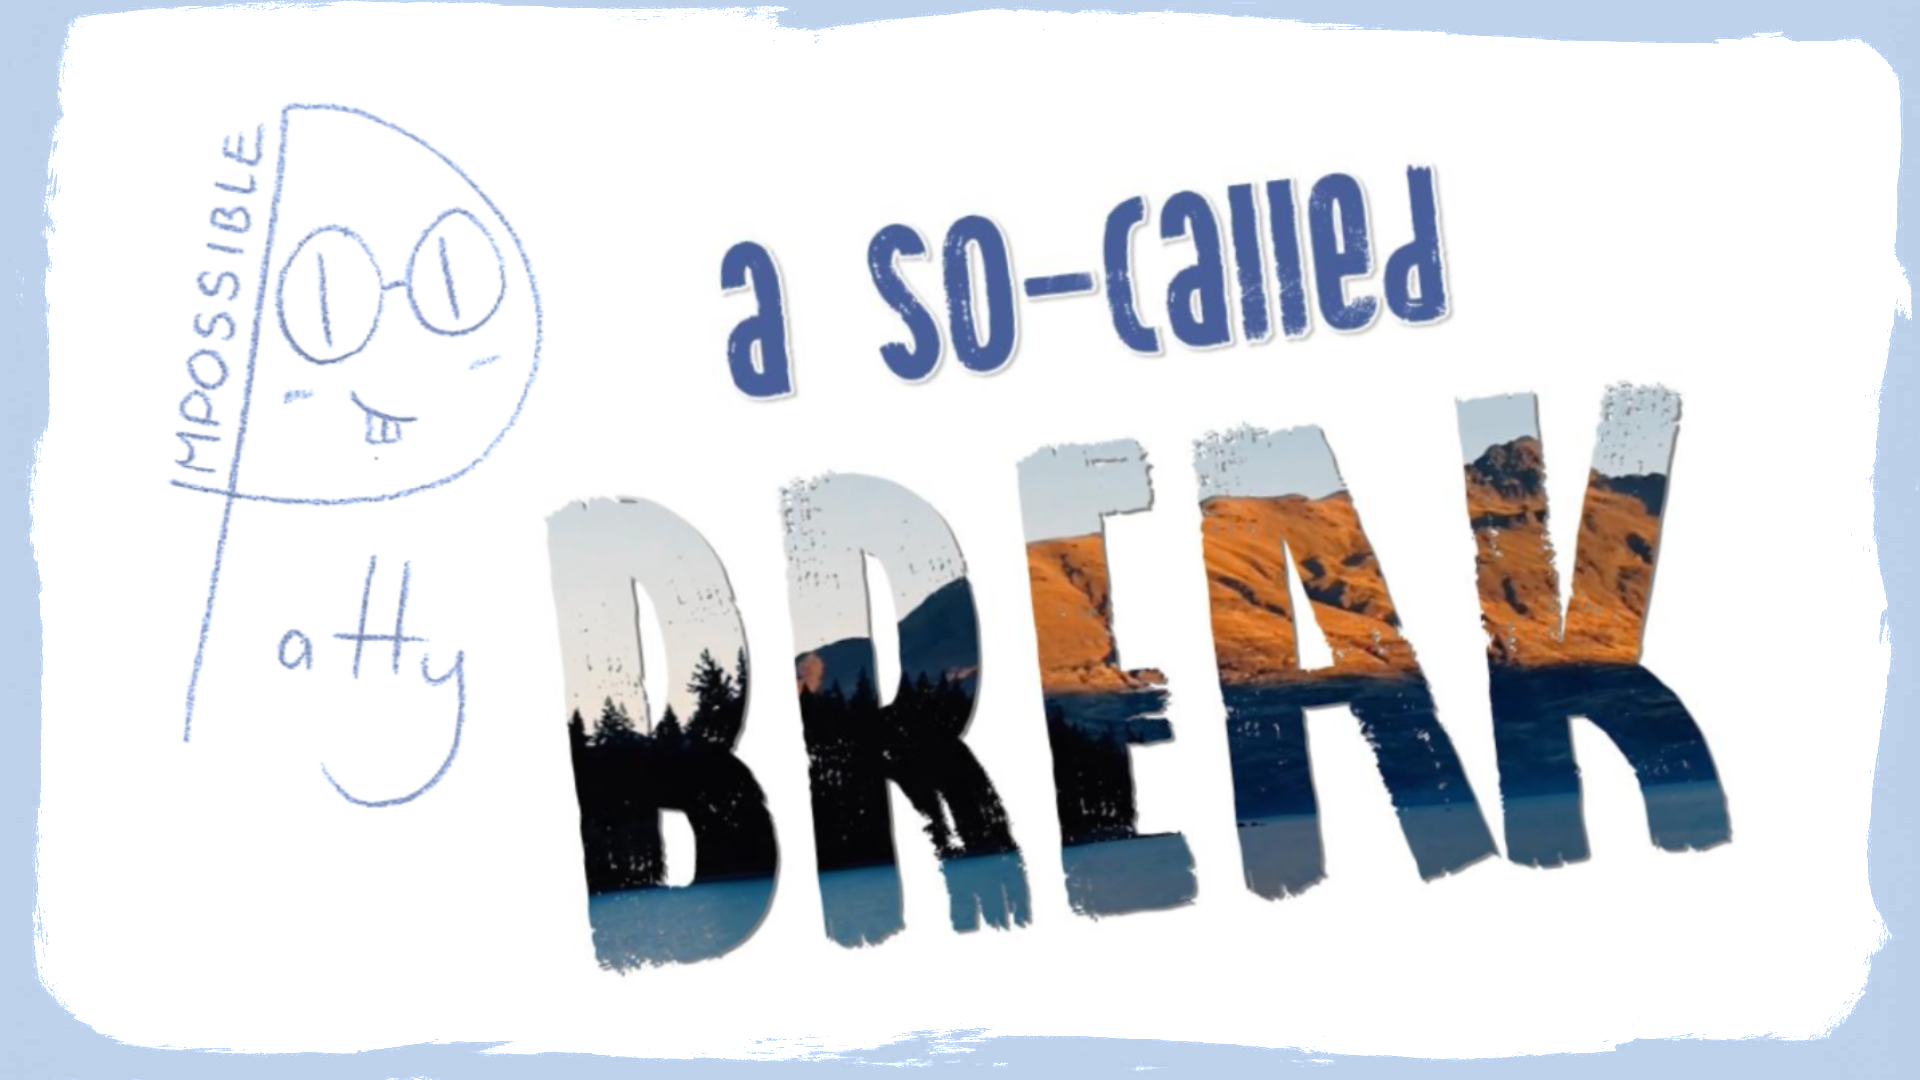 222-a-so-called-break-thumbnail.png